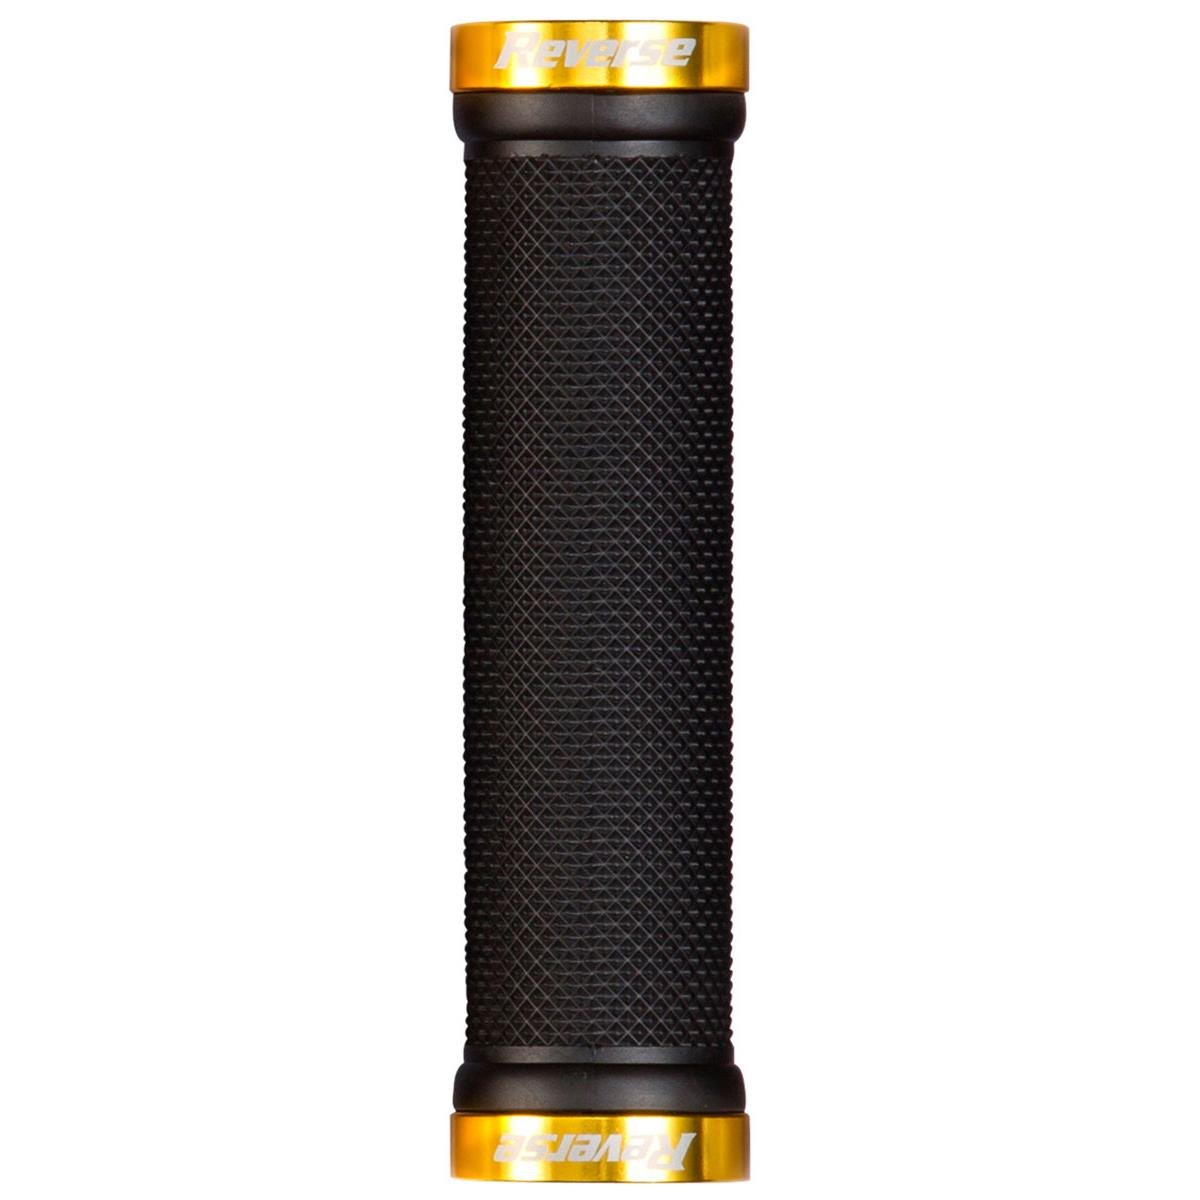 Reverse Components MTB Grips Classic Lock-On System, 29 x 130 mm, Black/Gold